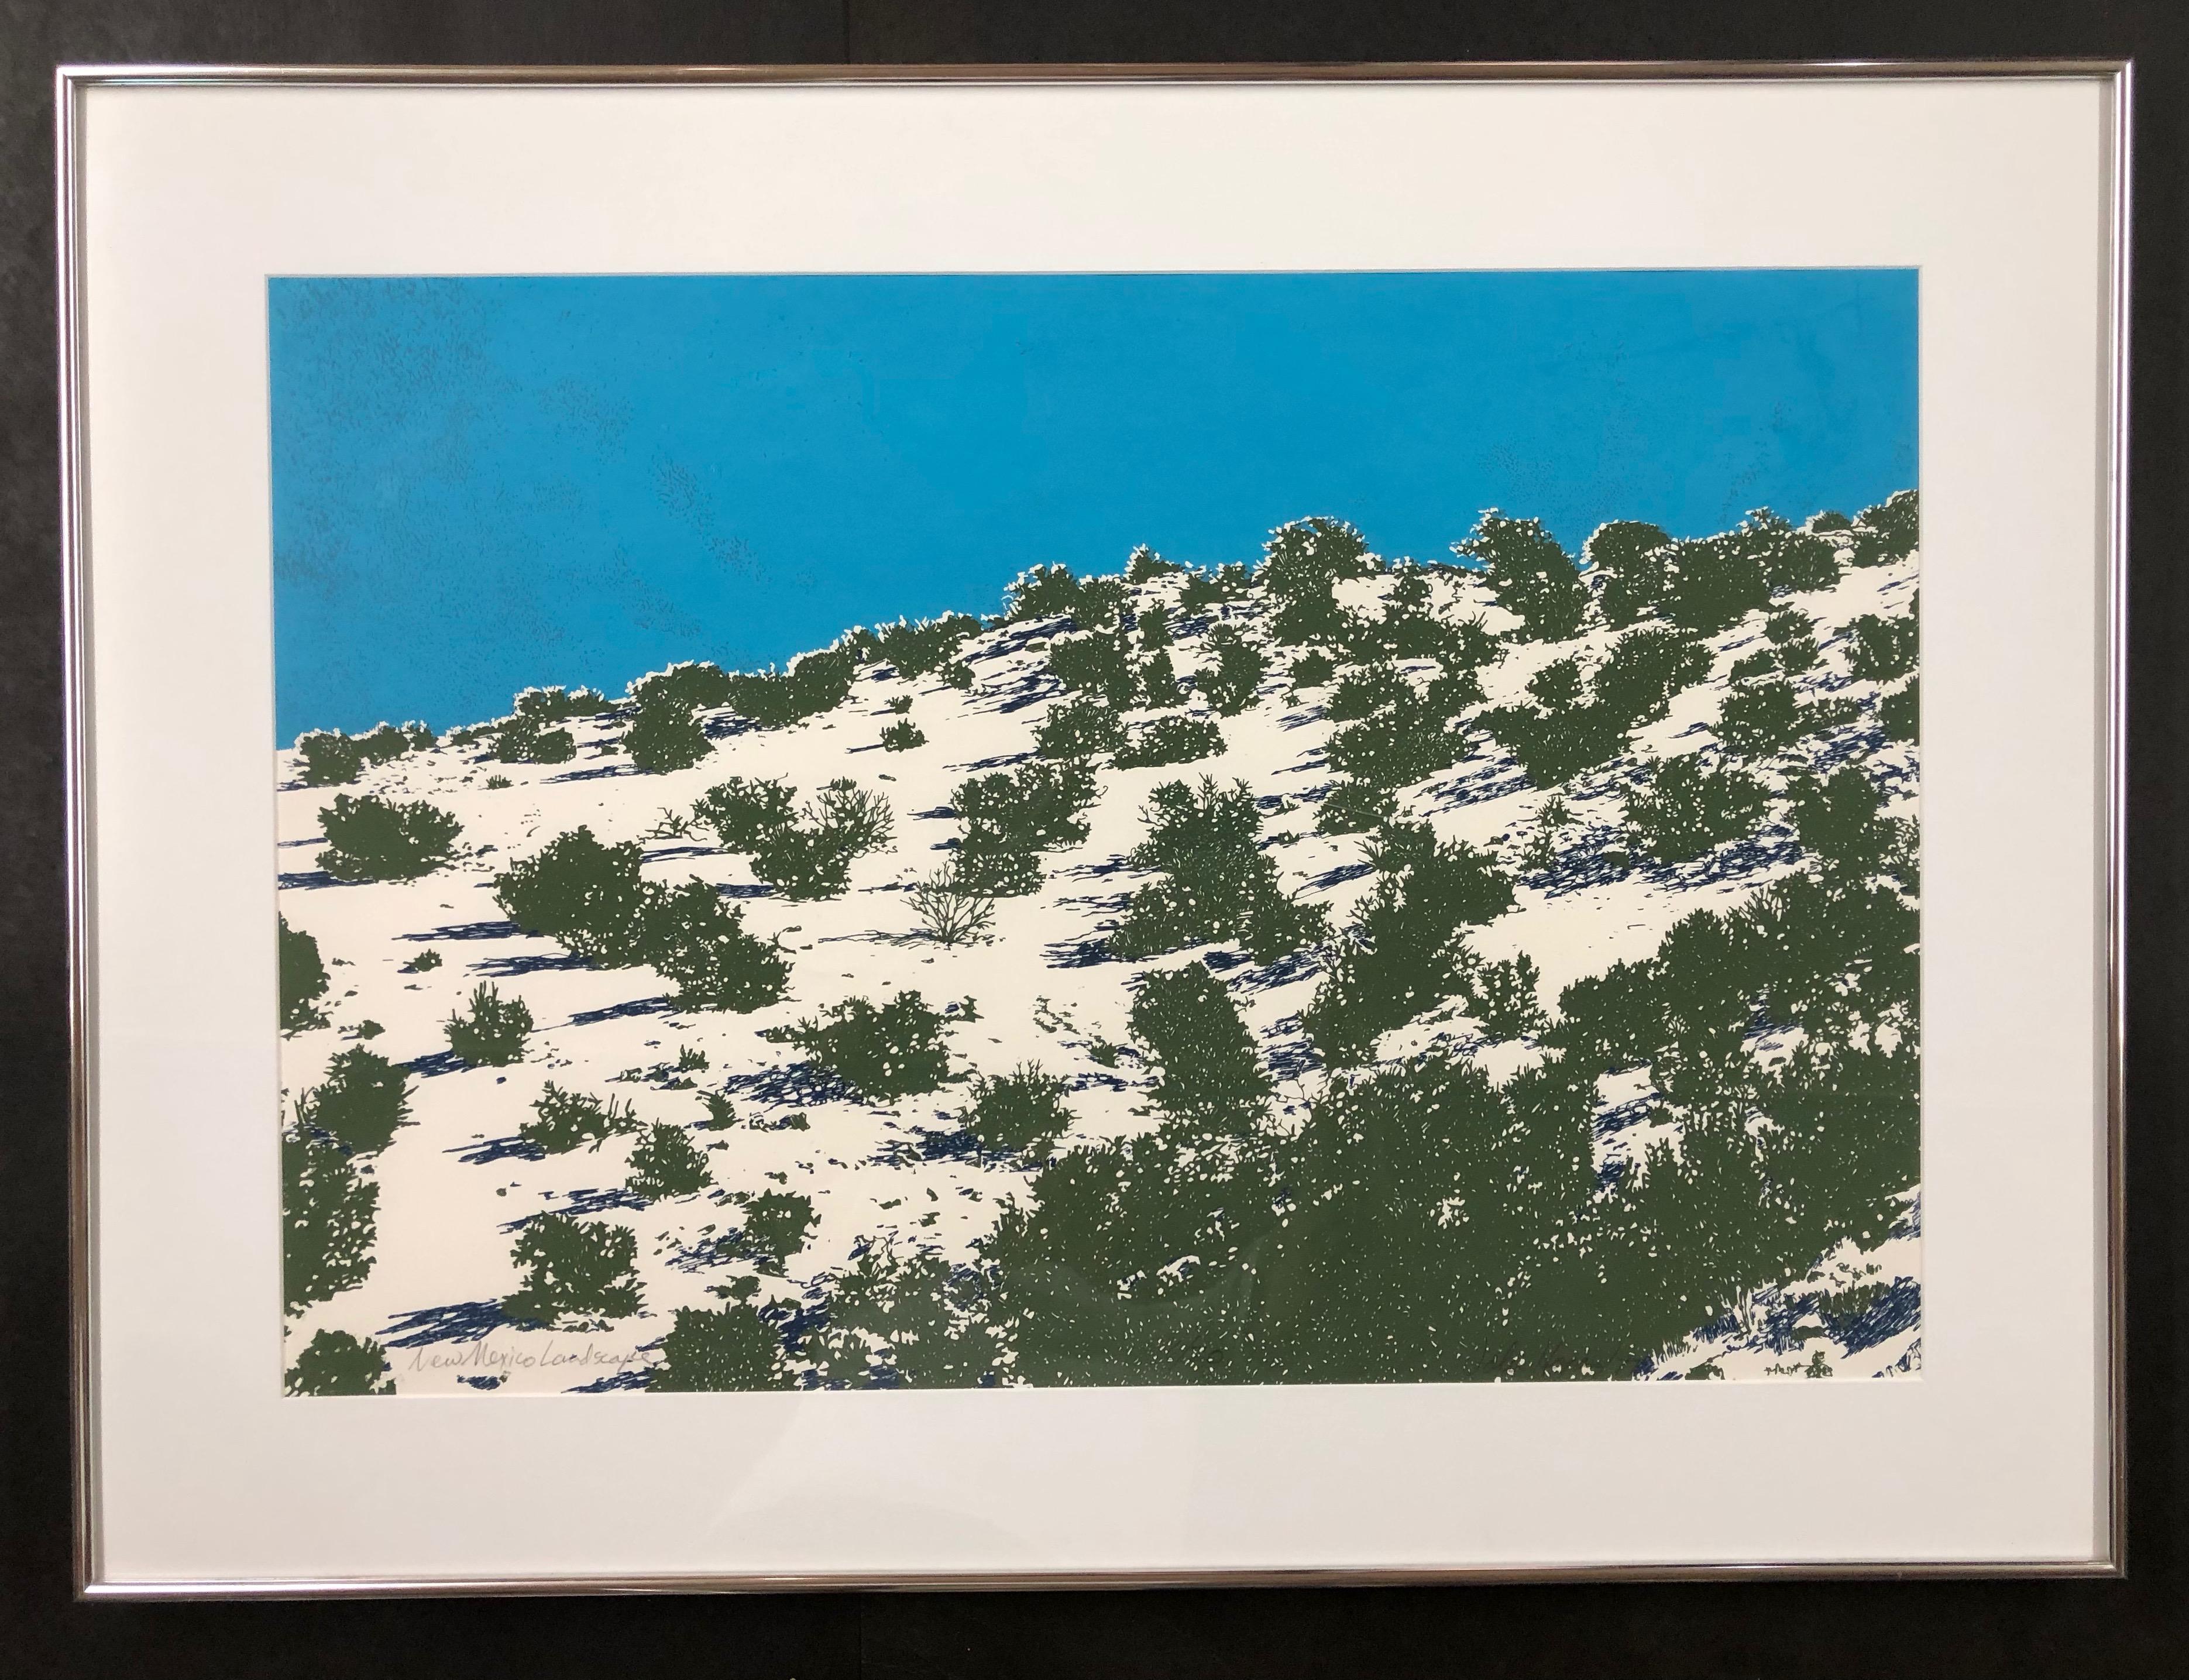 New Mexico Landscape by John Hogan, serigraph screen print limited edition